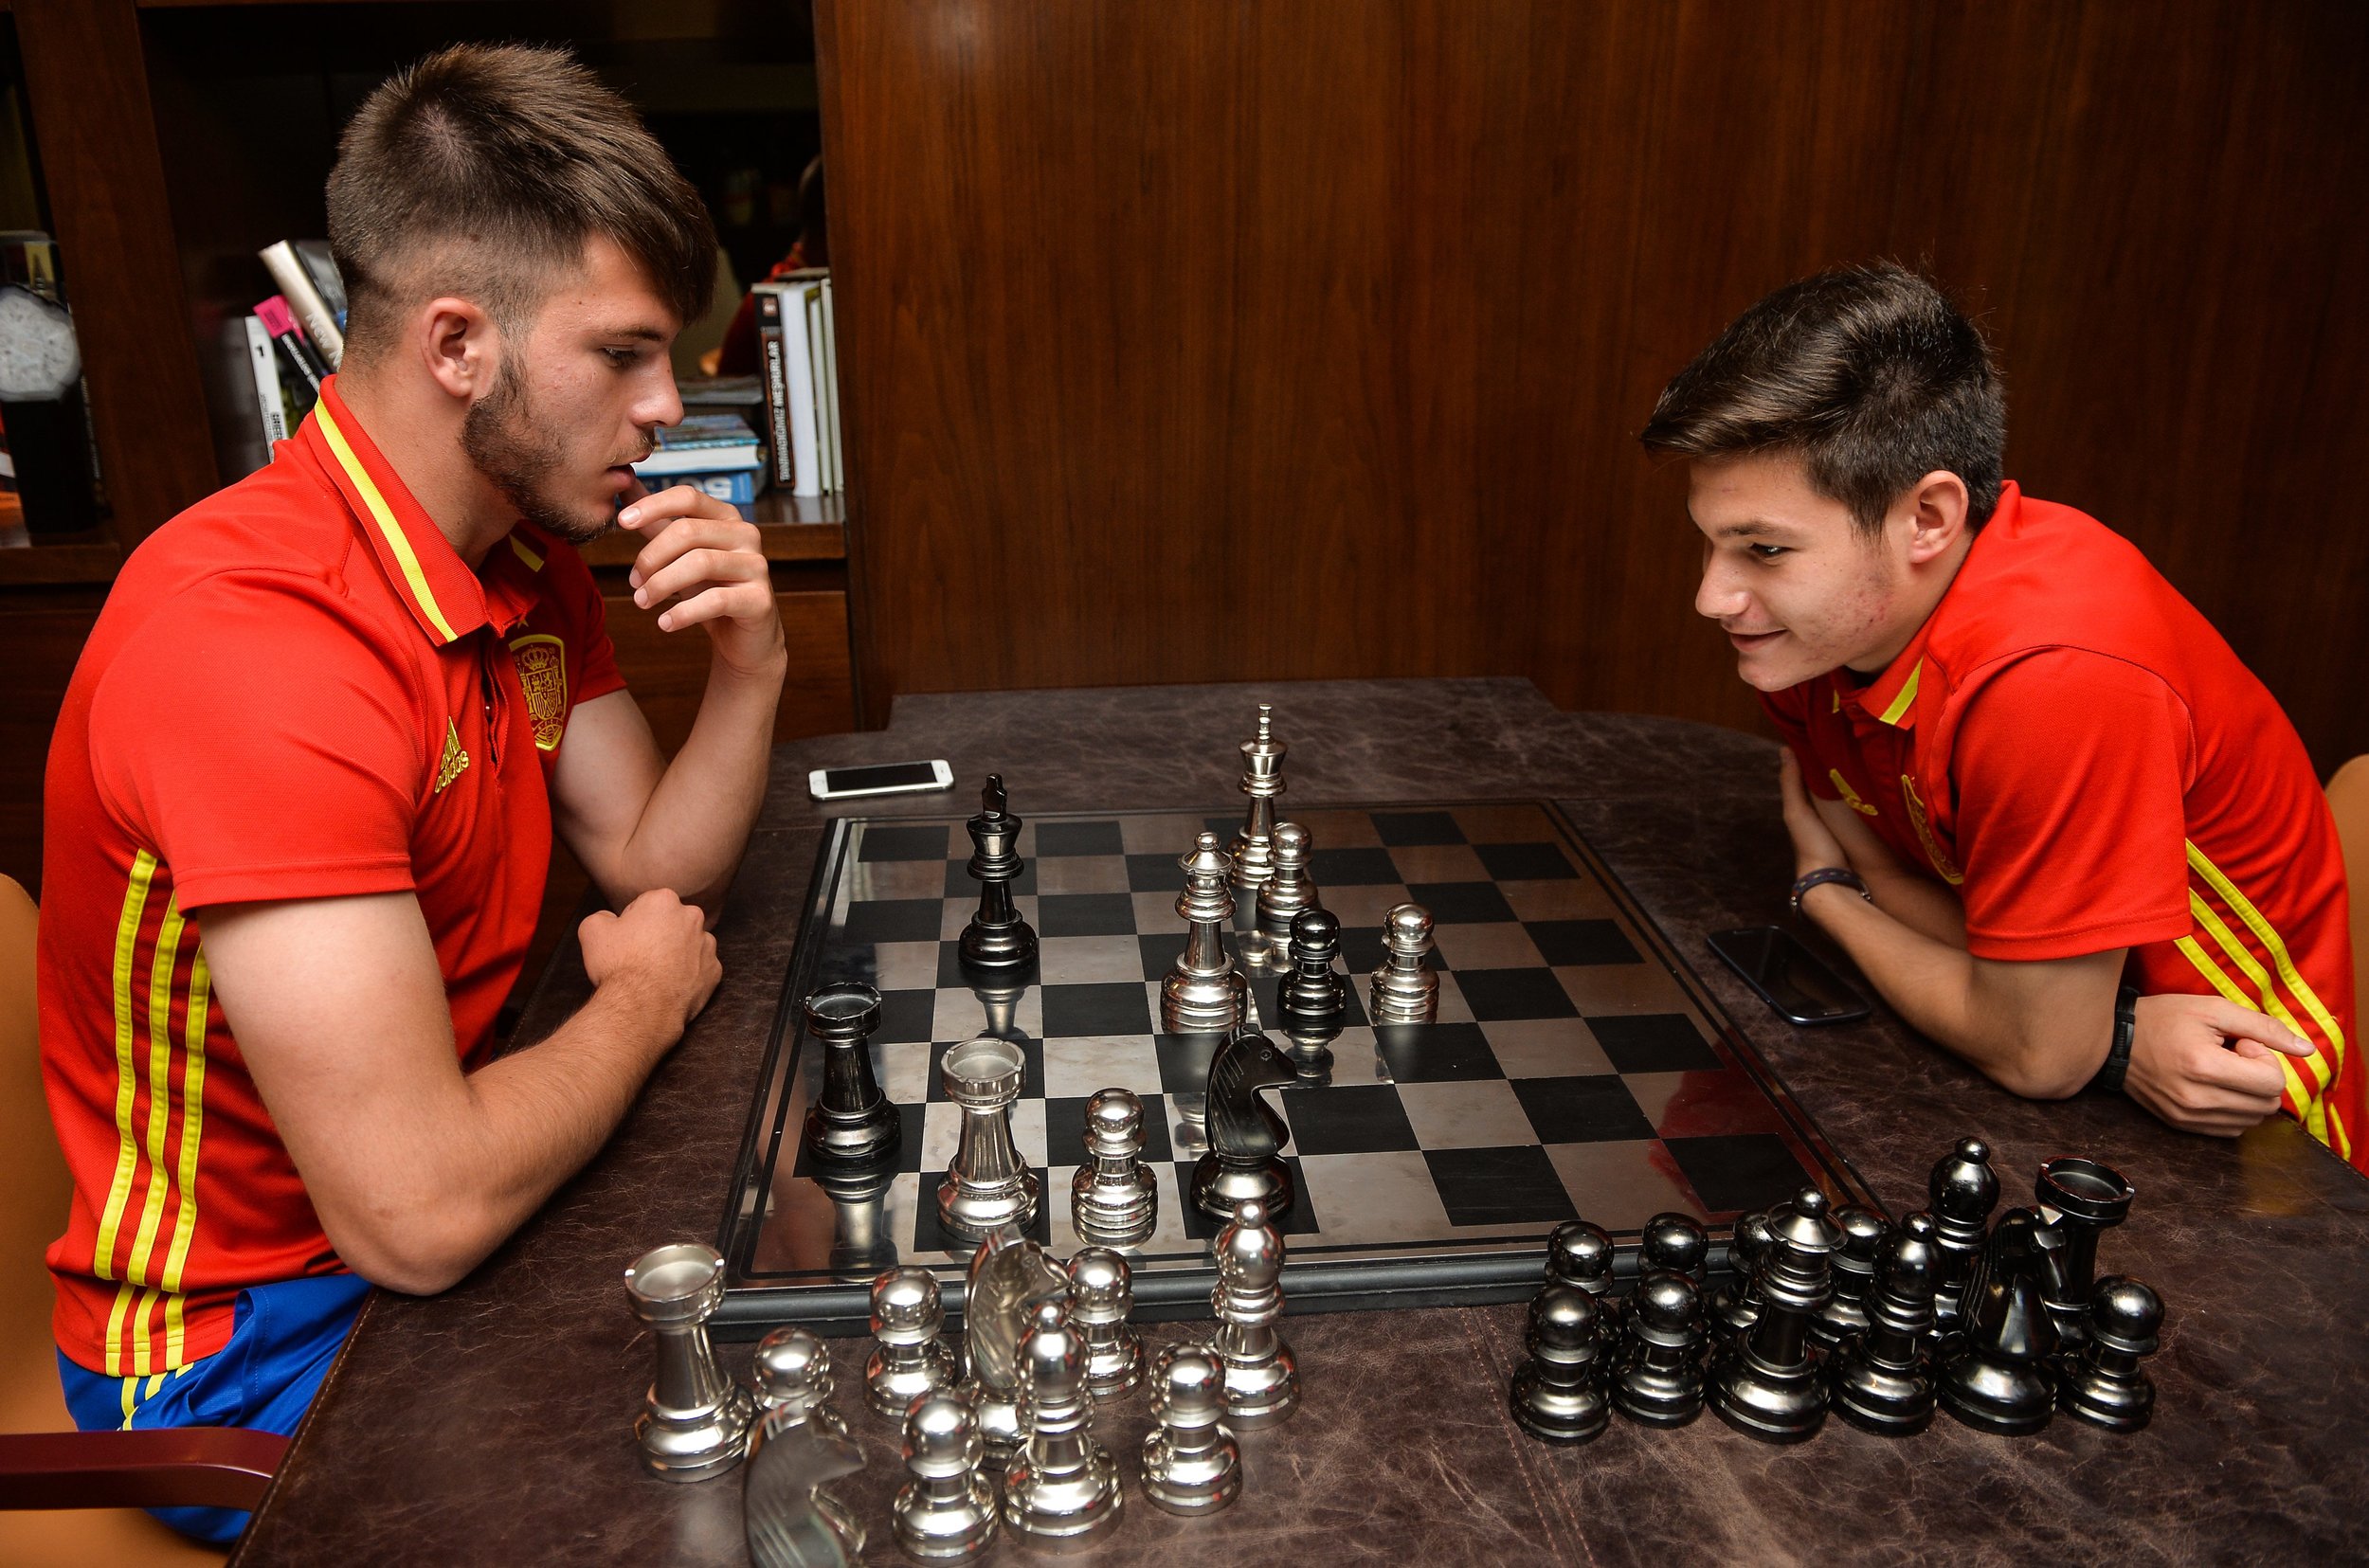  Spain team-mates strategize over some chess before their final against Portugal in Azerbaijan 2016 /  UEFA / Sportsfile  